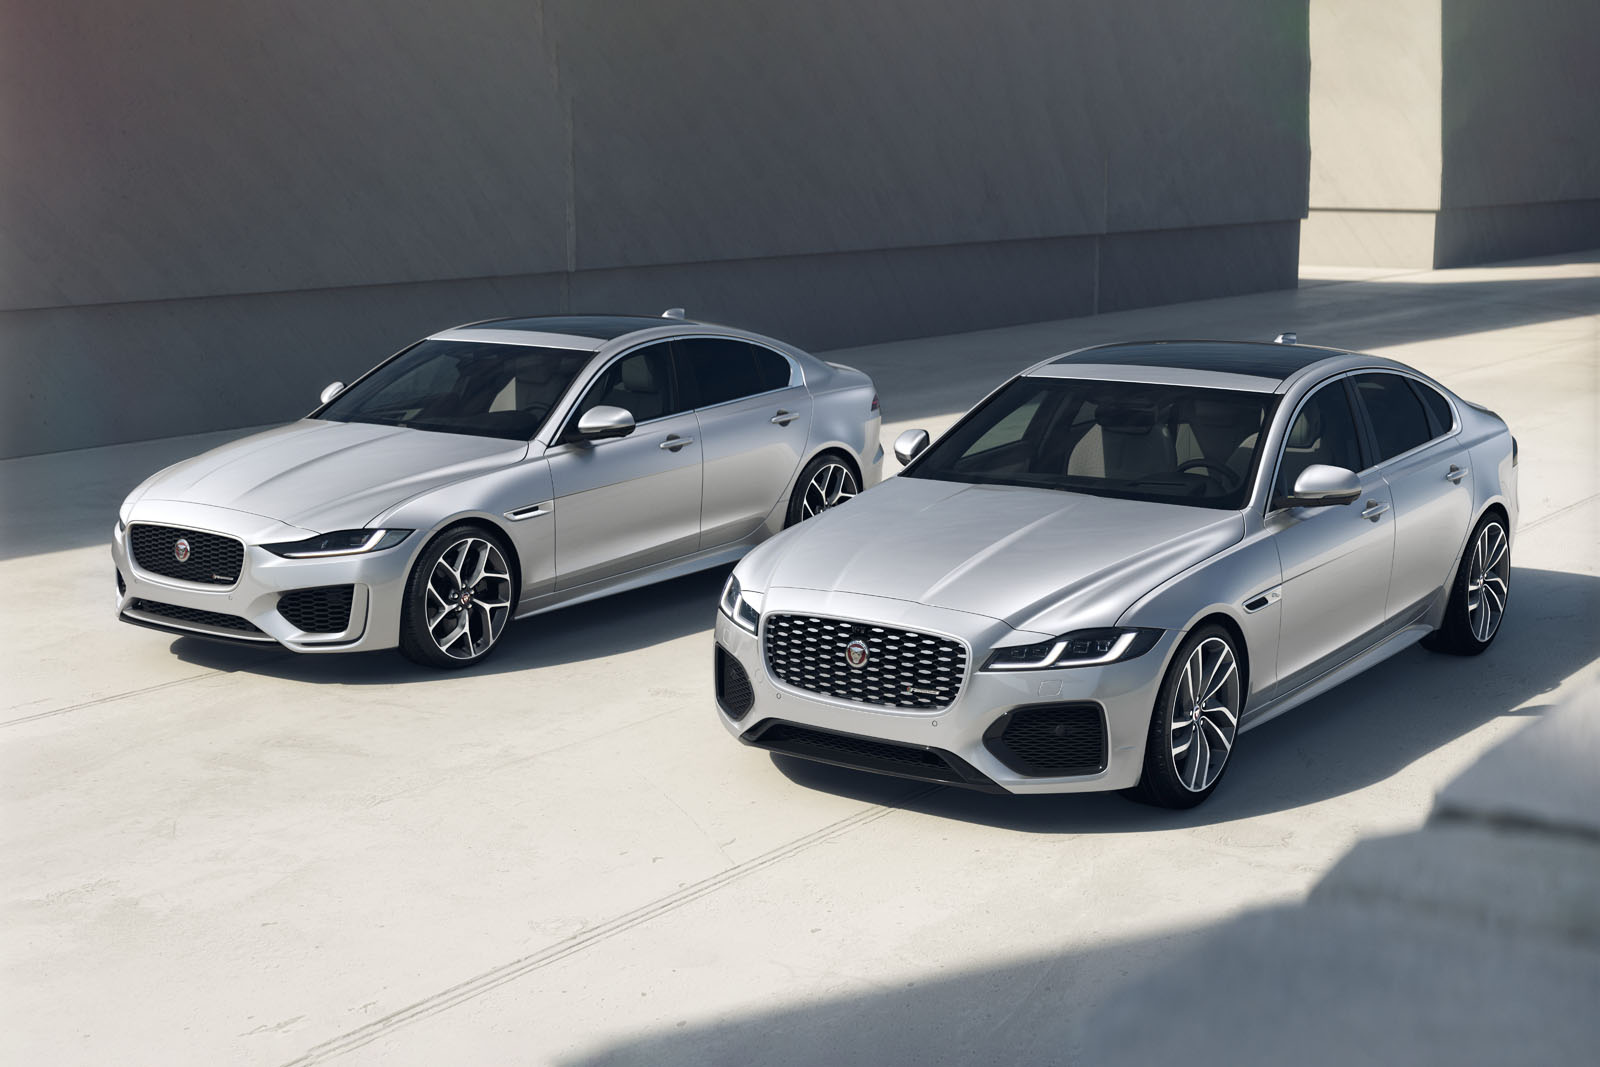 JLR limits production of cheaper Jaguar and Land Rover cars